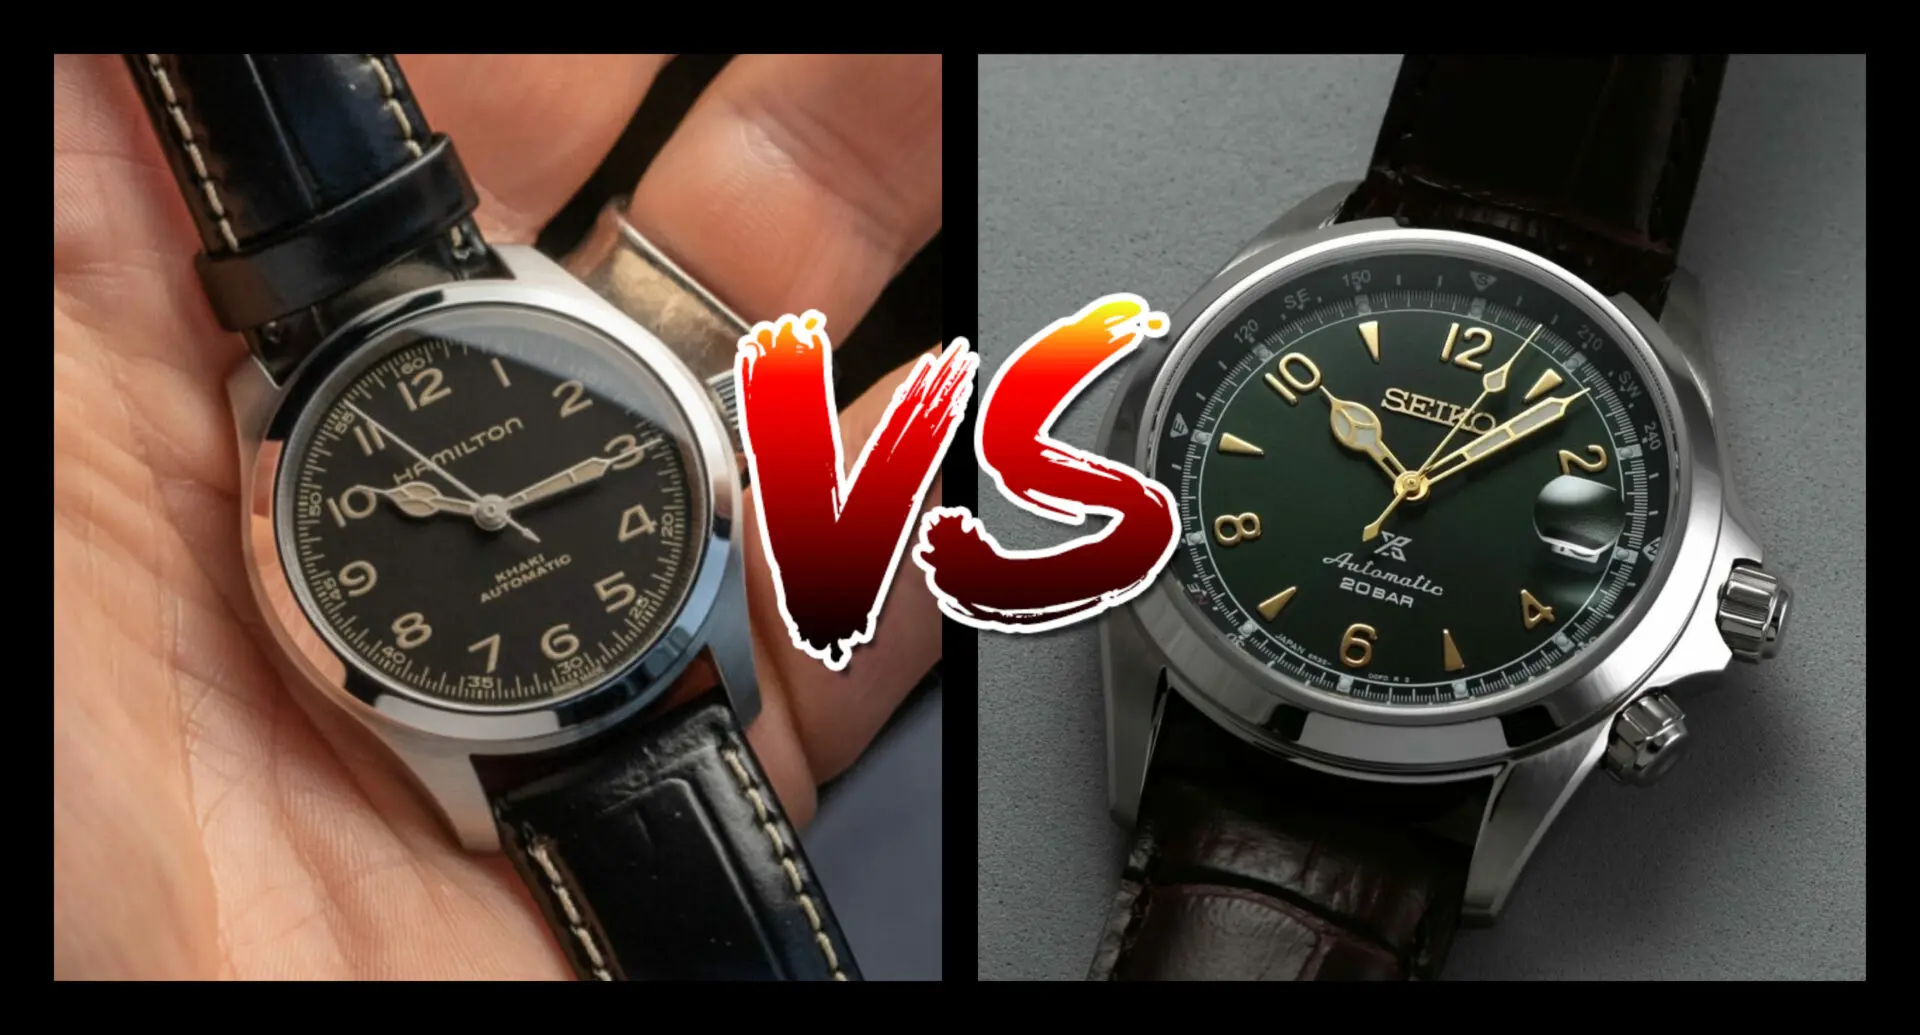 VERSUS: The Hamilton Murph 38 comes up against the Seiko Alpinist SPB121 -  Time and Tide Watches